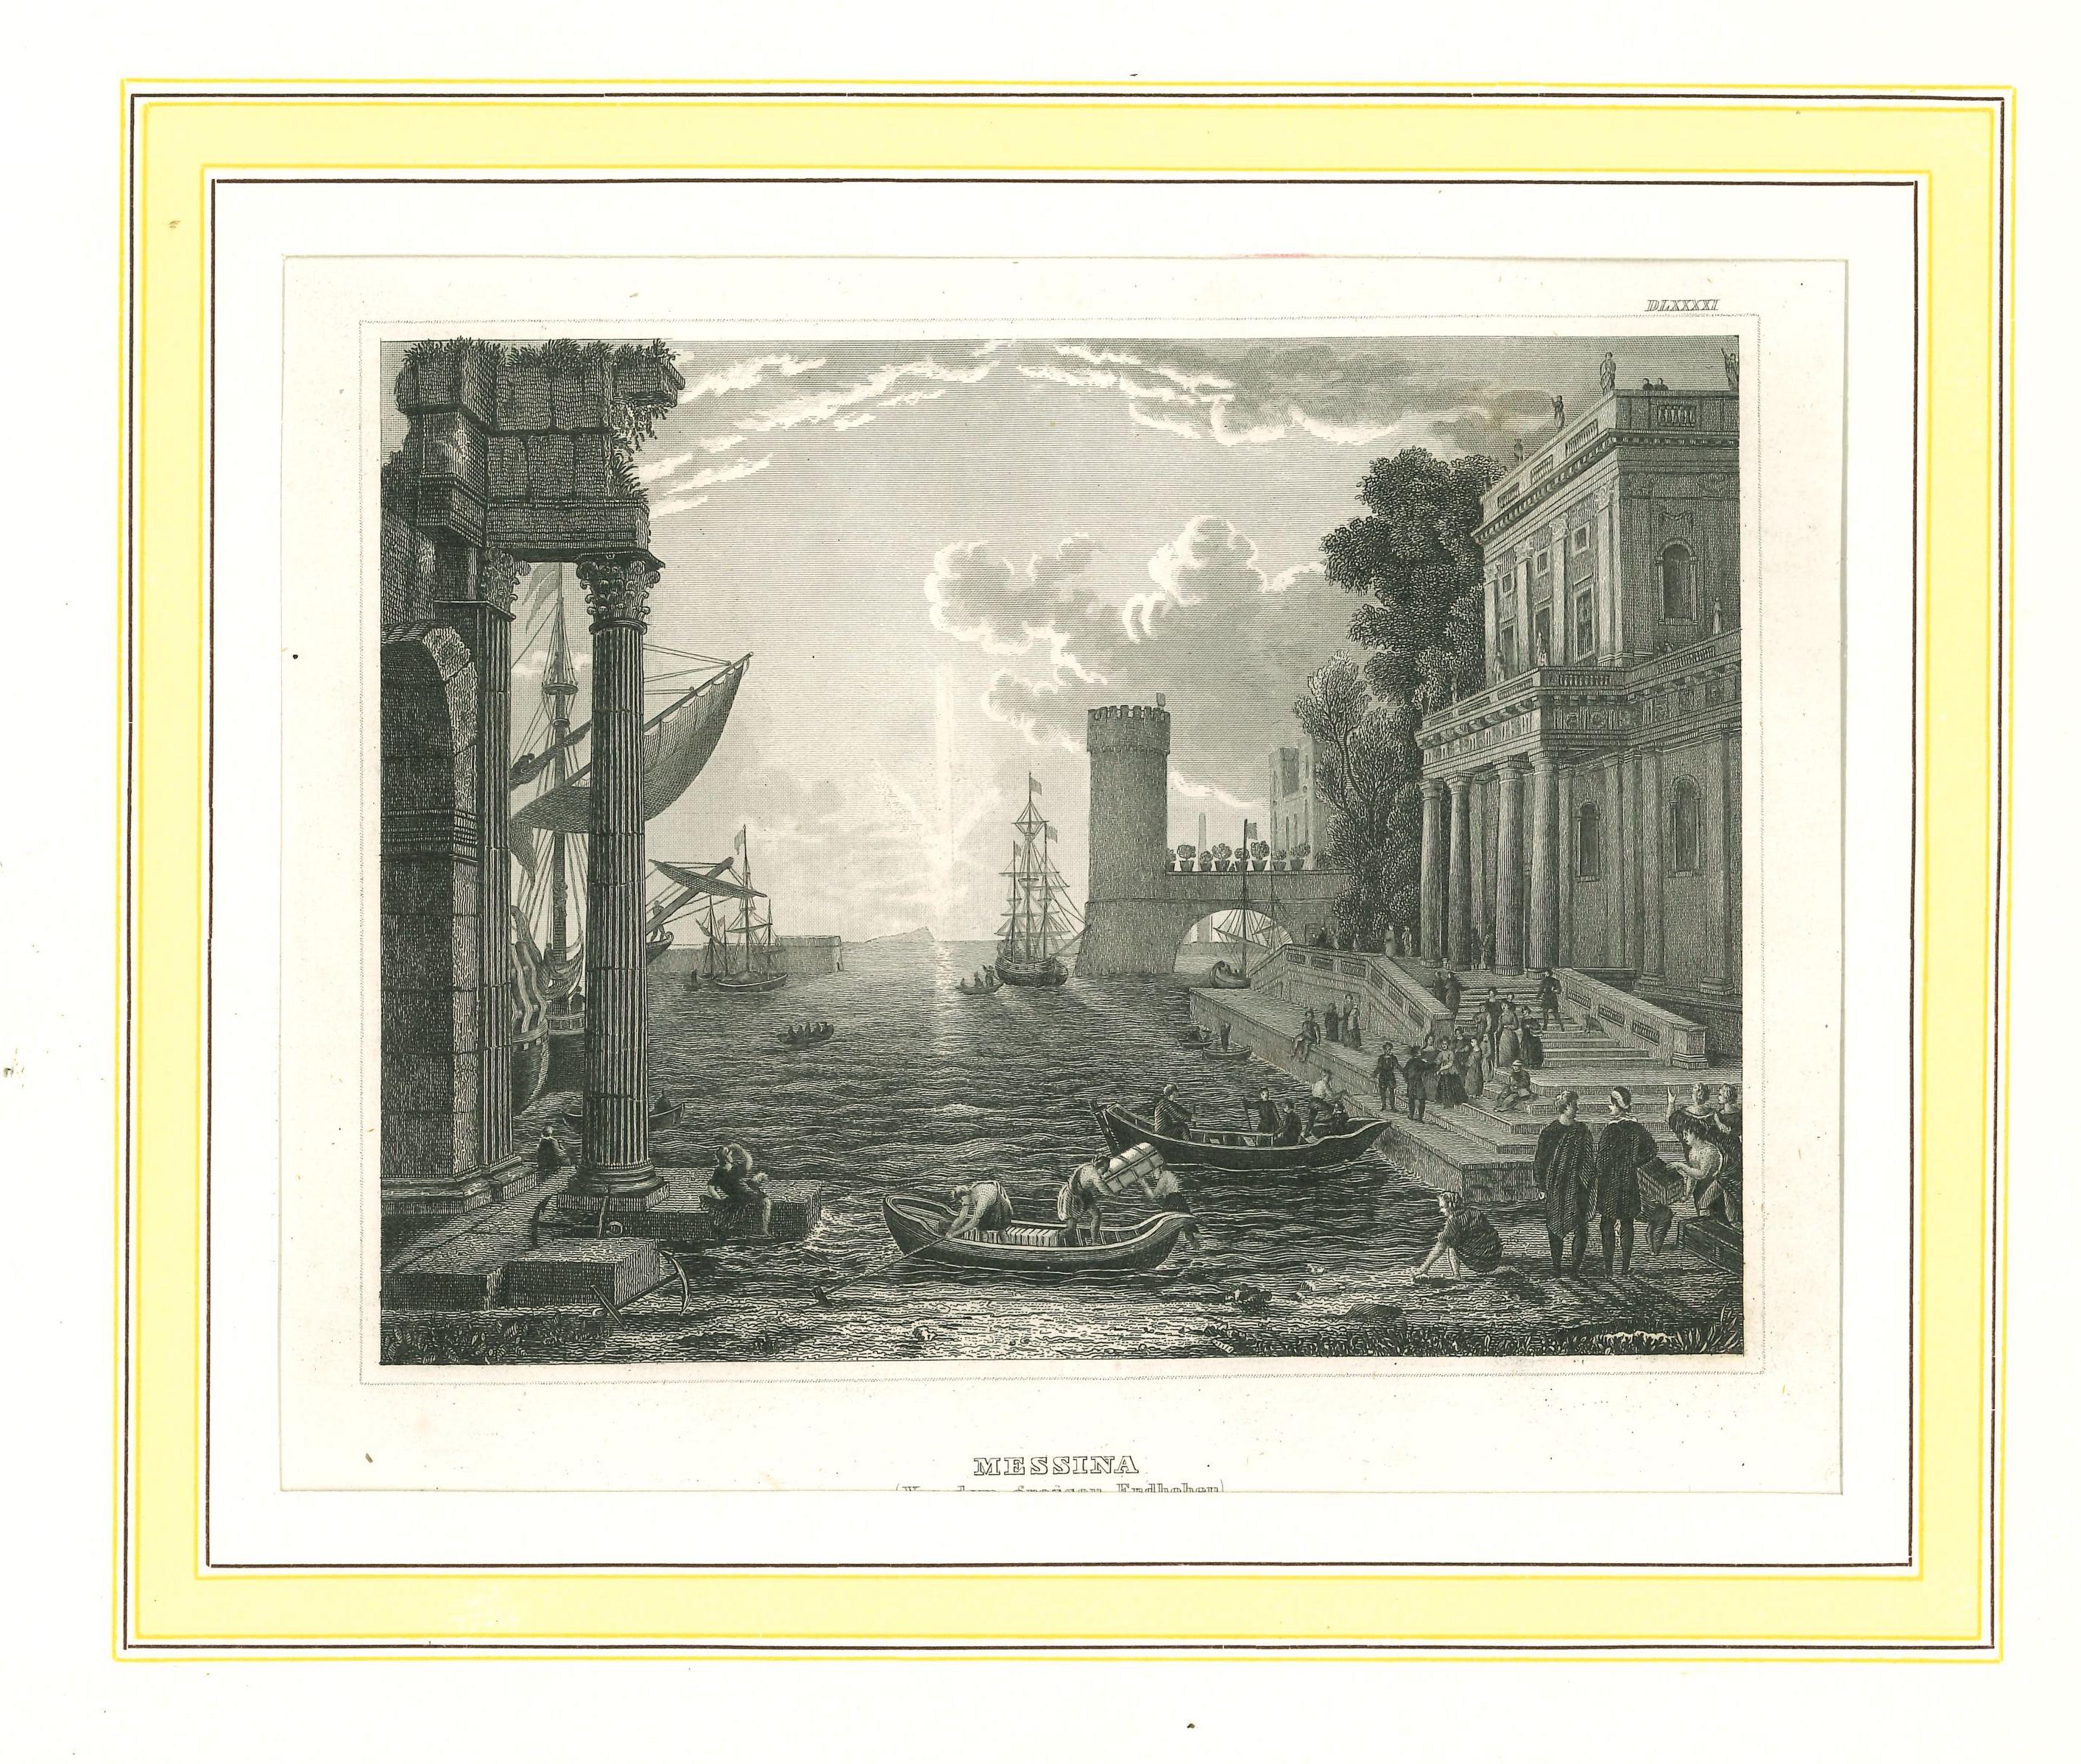 Unknown Landscape Print - Ancient View of Messina - Original Lithograph on Paper - Mid-19th Century